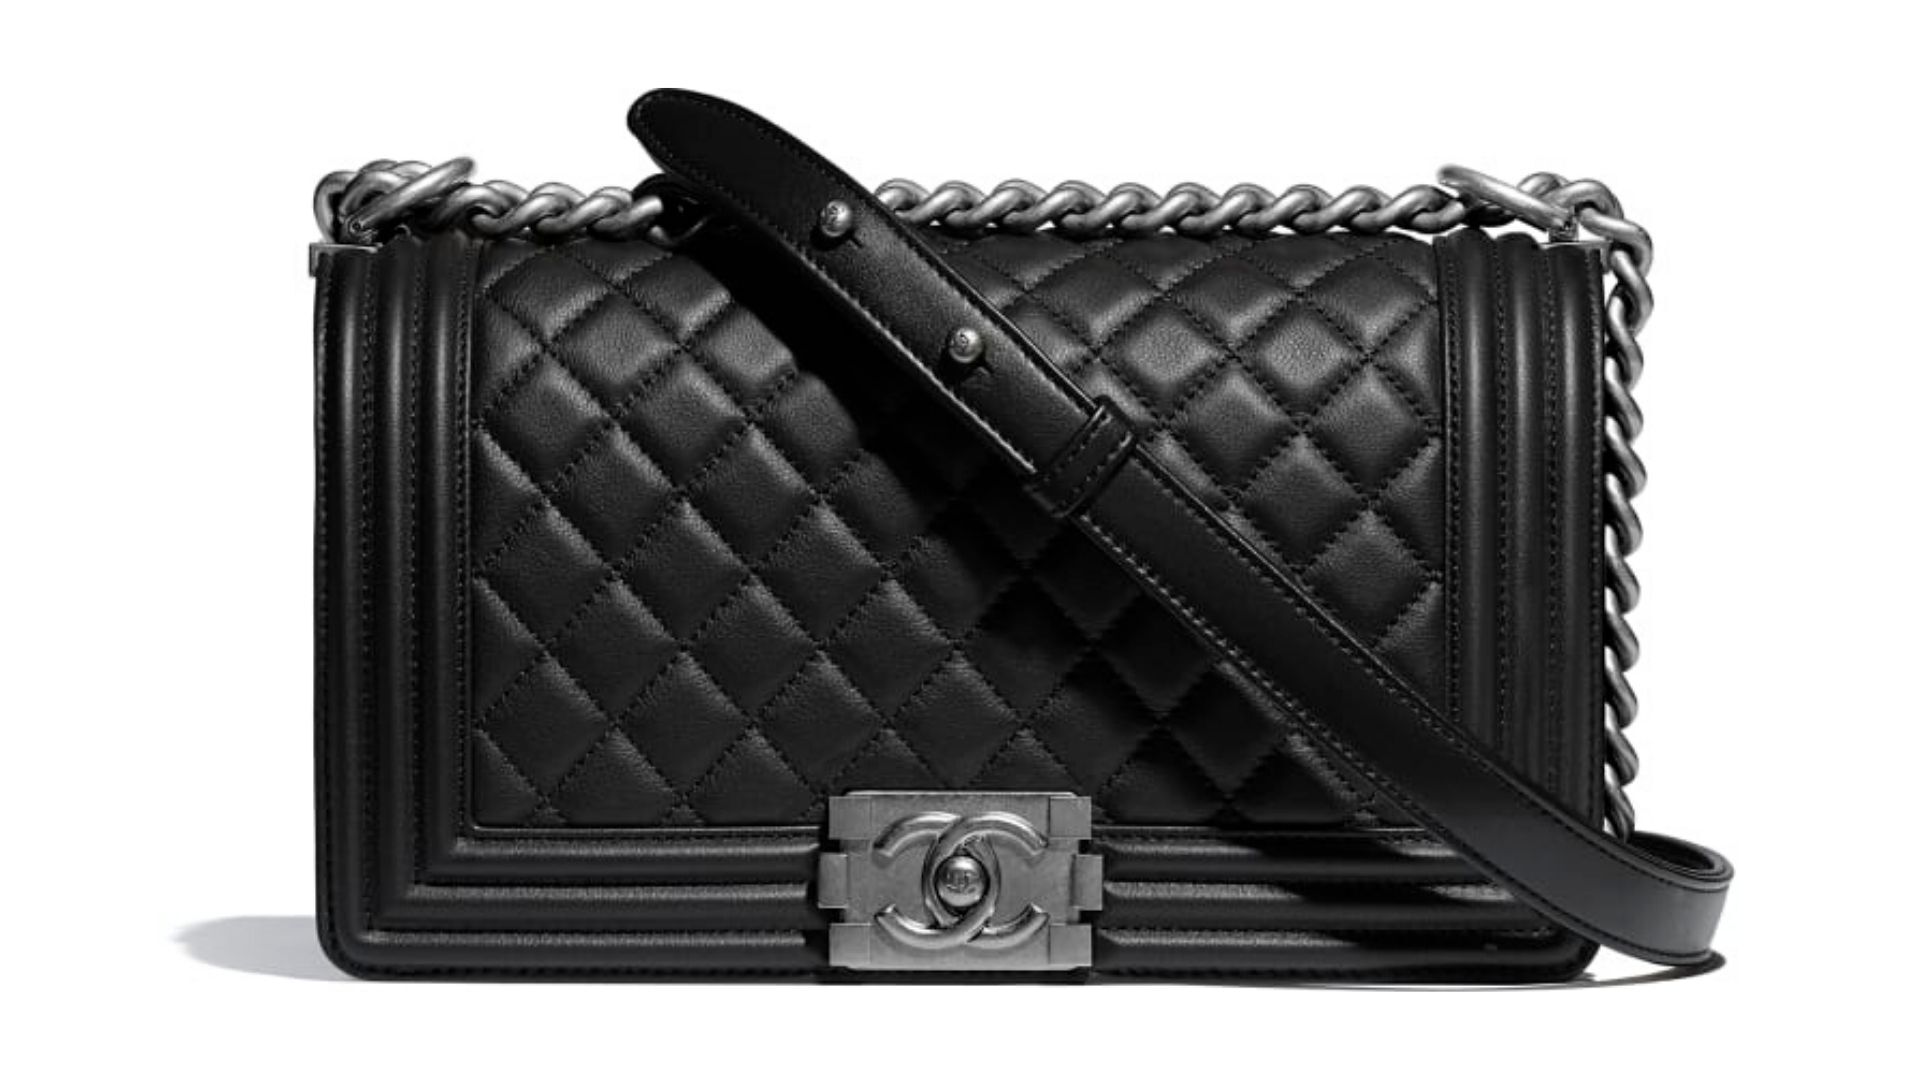 Chanel's 5 Most Popular Products Over the Years